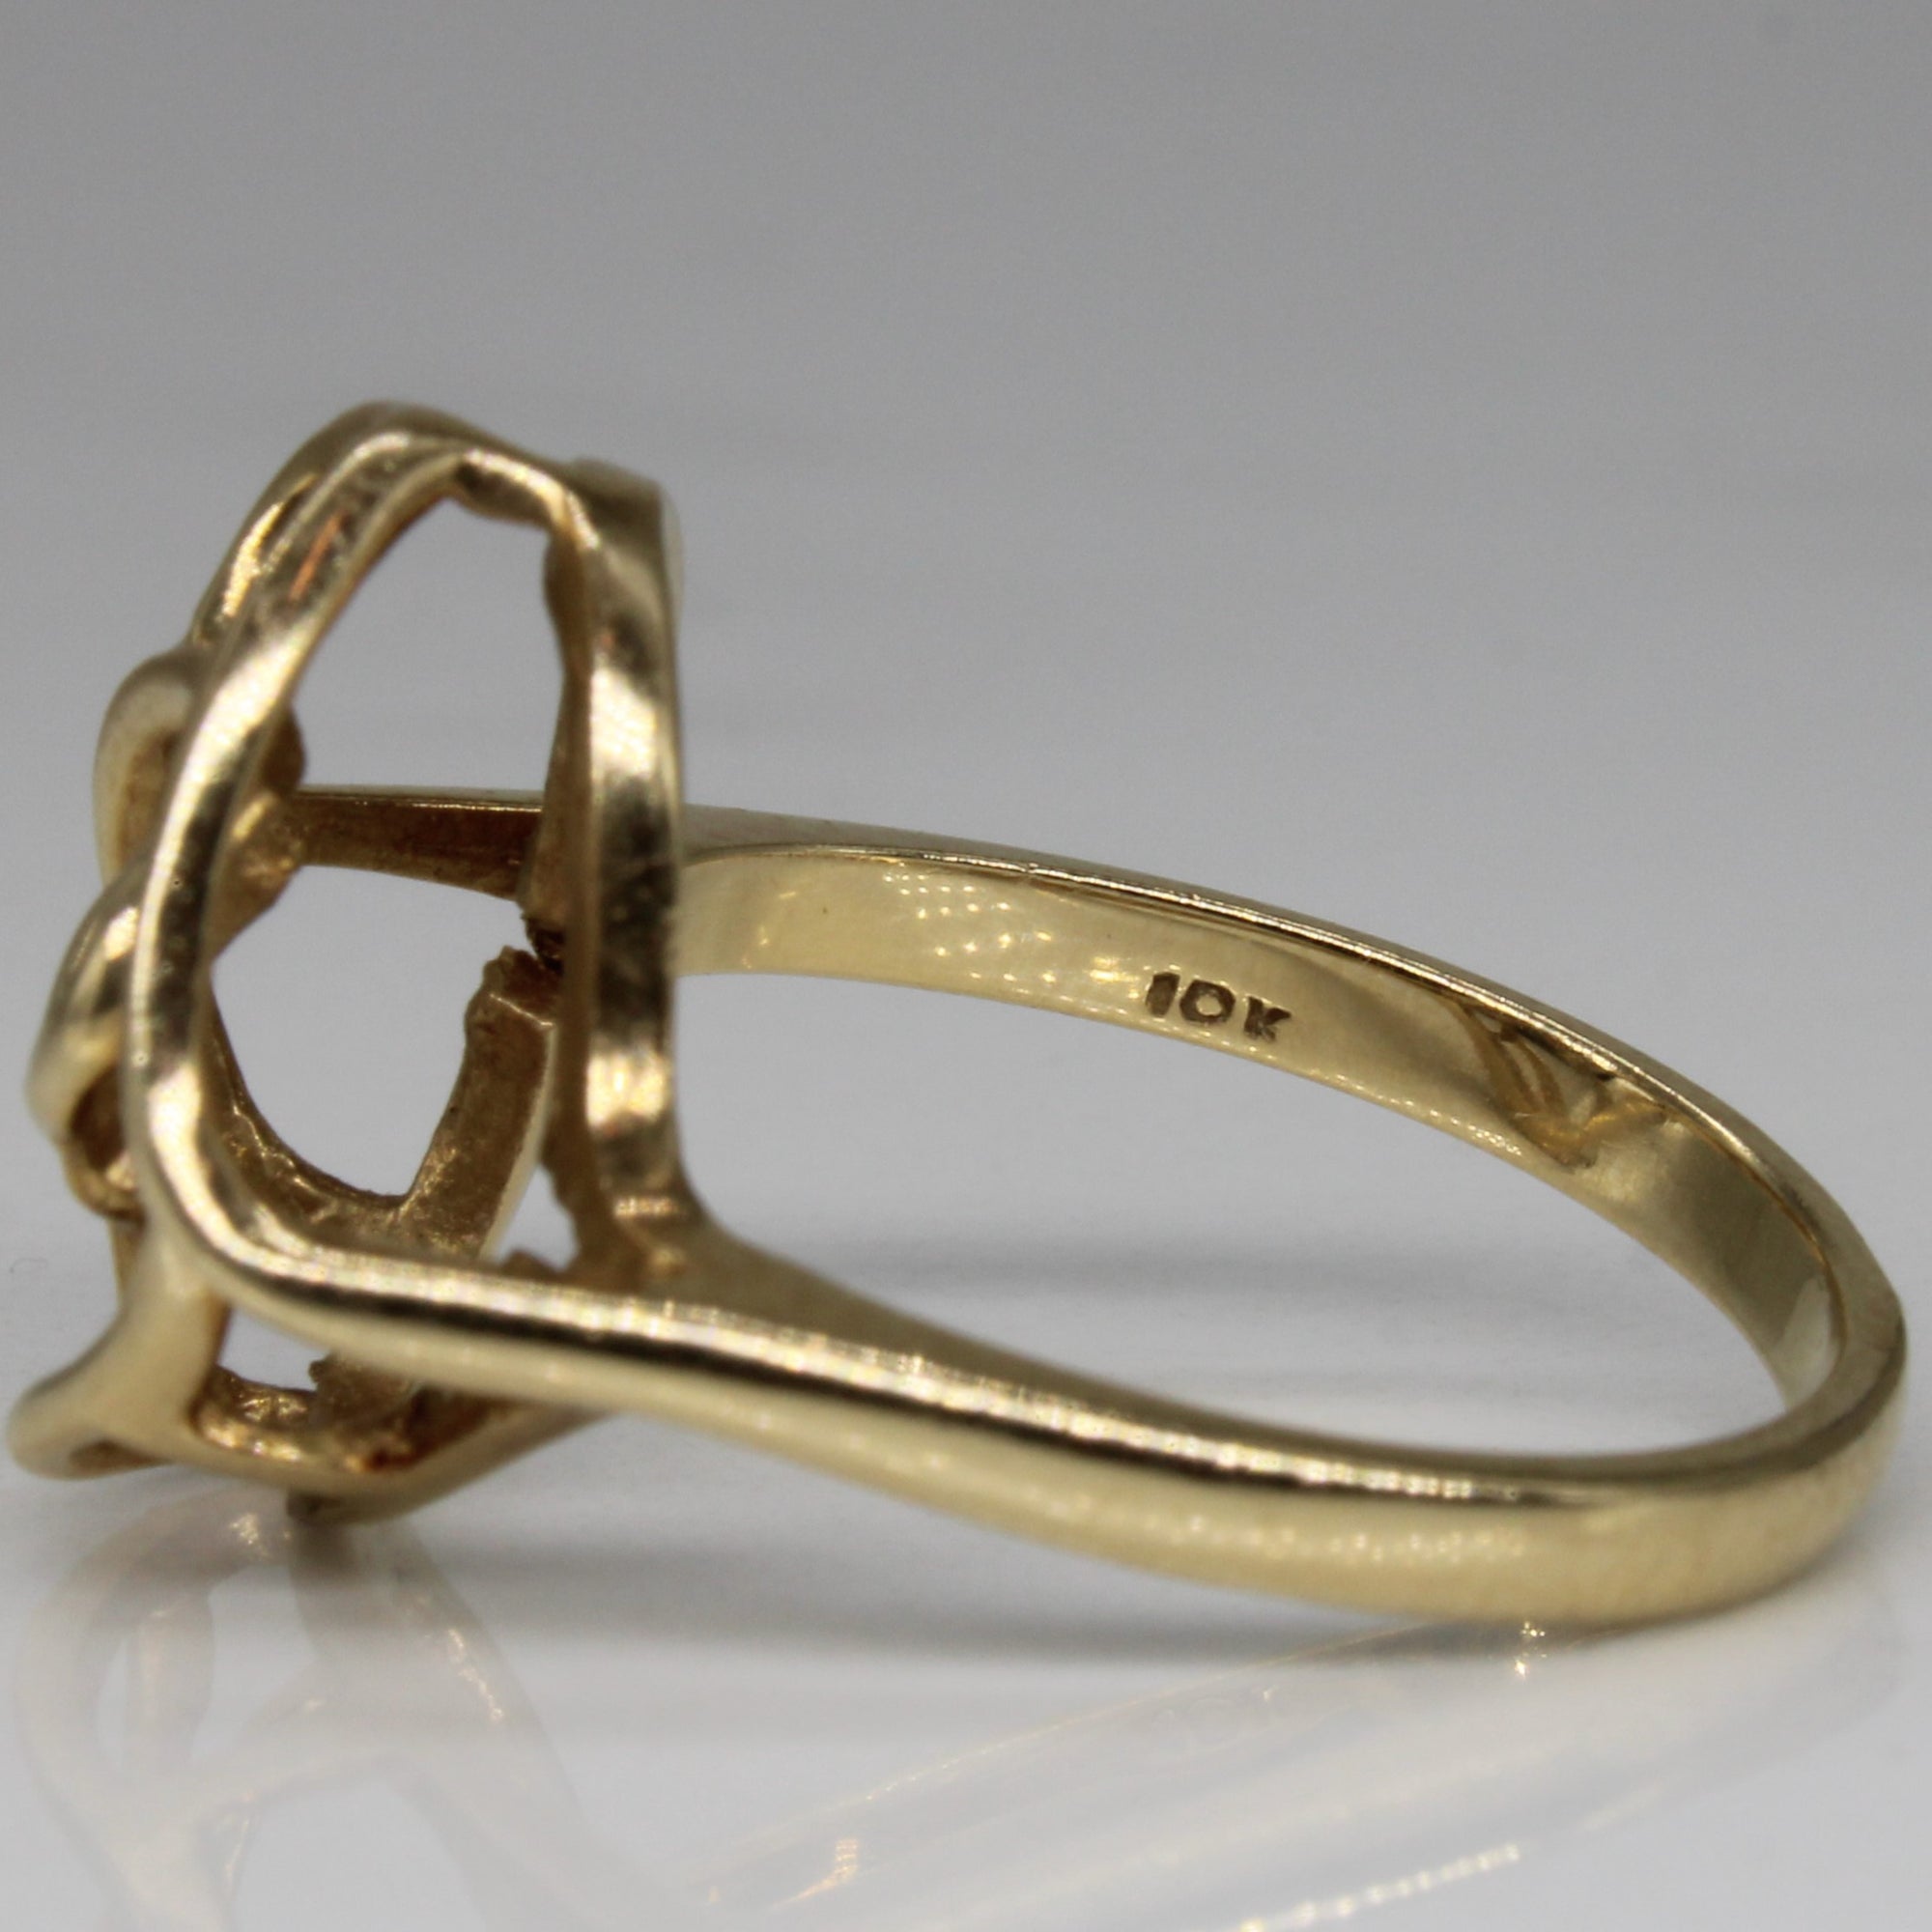 Yellow Gold Abstract Bloom Ring | SZ 5.75 |